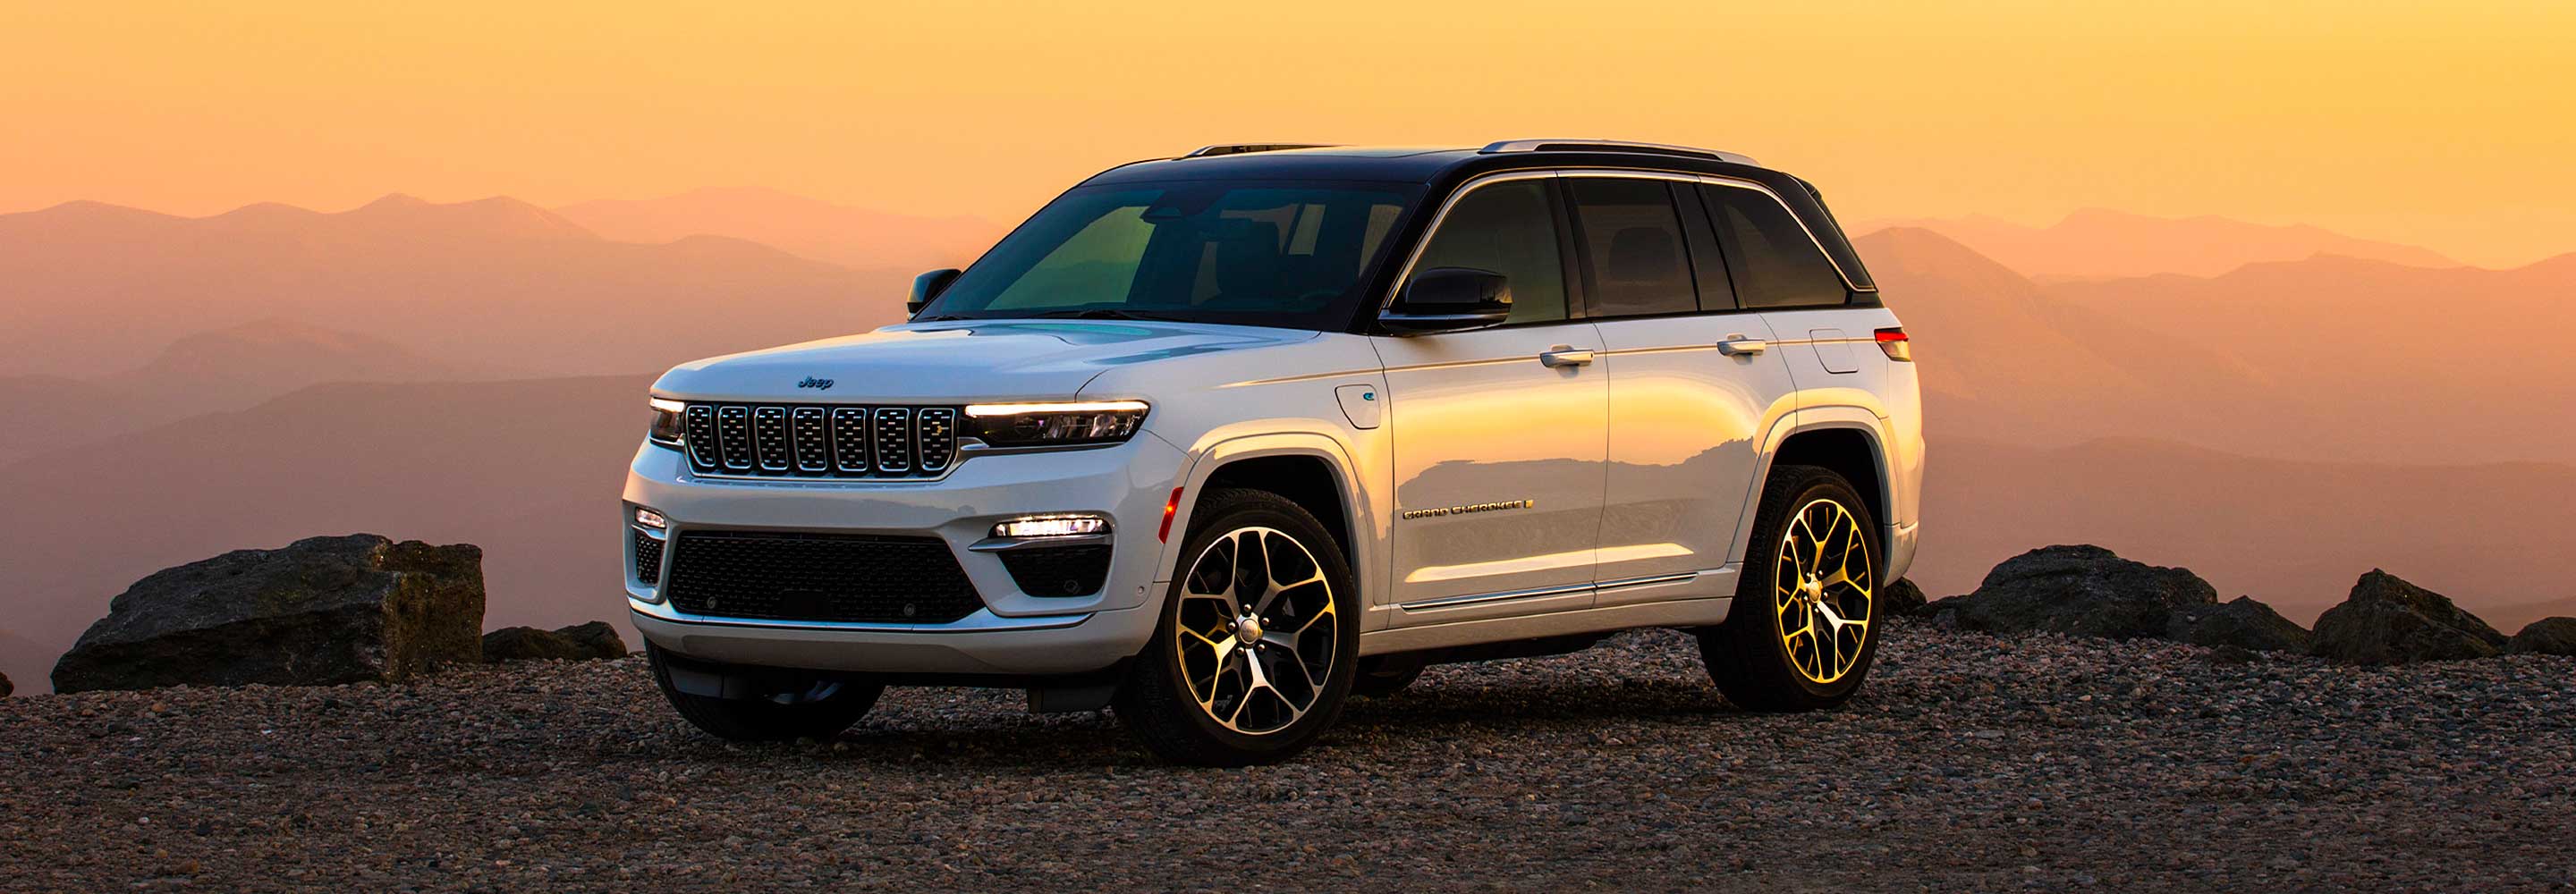 MPG City/Highway/... Off-Road? The 2023 Jeep® Grand Cherokee 4xe